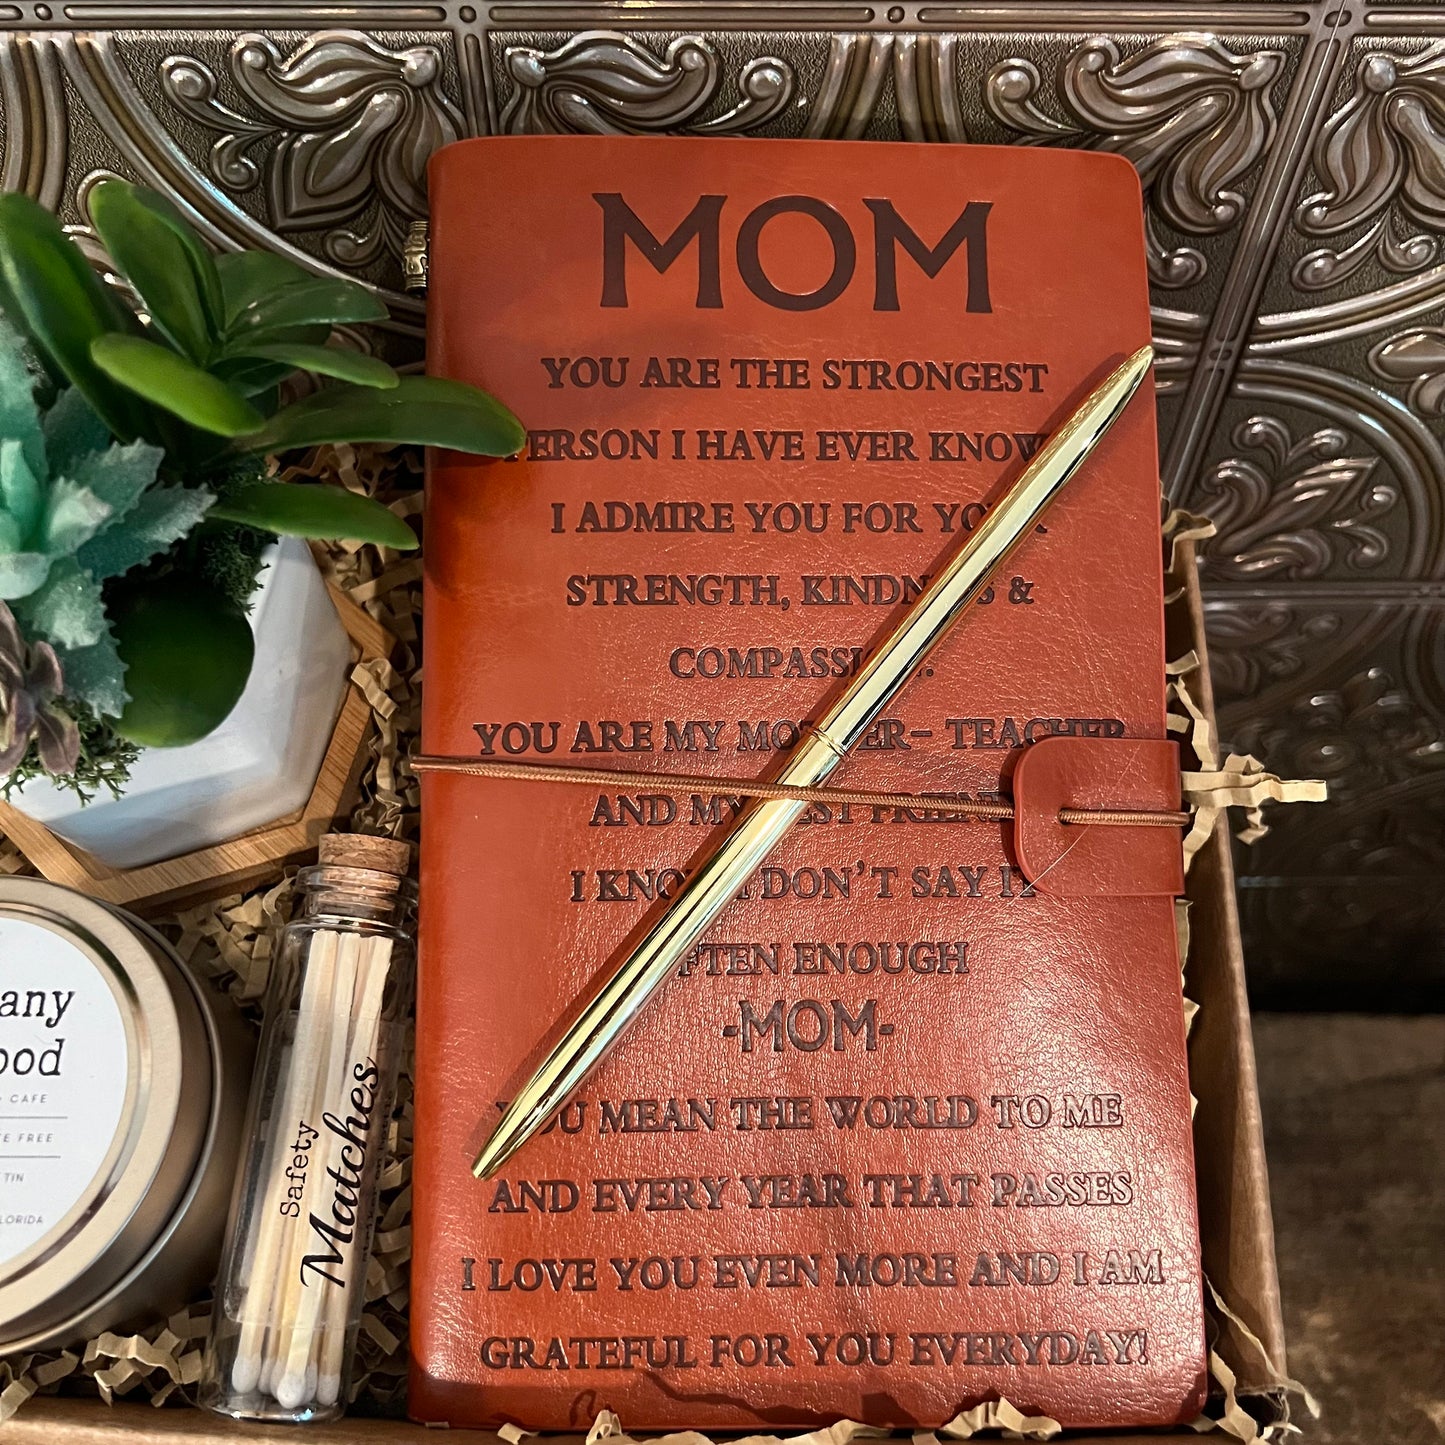 Mom Gift Box l Mothers Day Gift Box l Thank You Gift l Custom Gift l Journal Gift l Candle Gift l Appreciation Gift Box l Birthday Gift Box